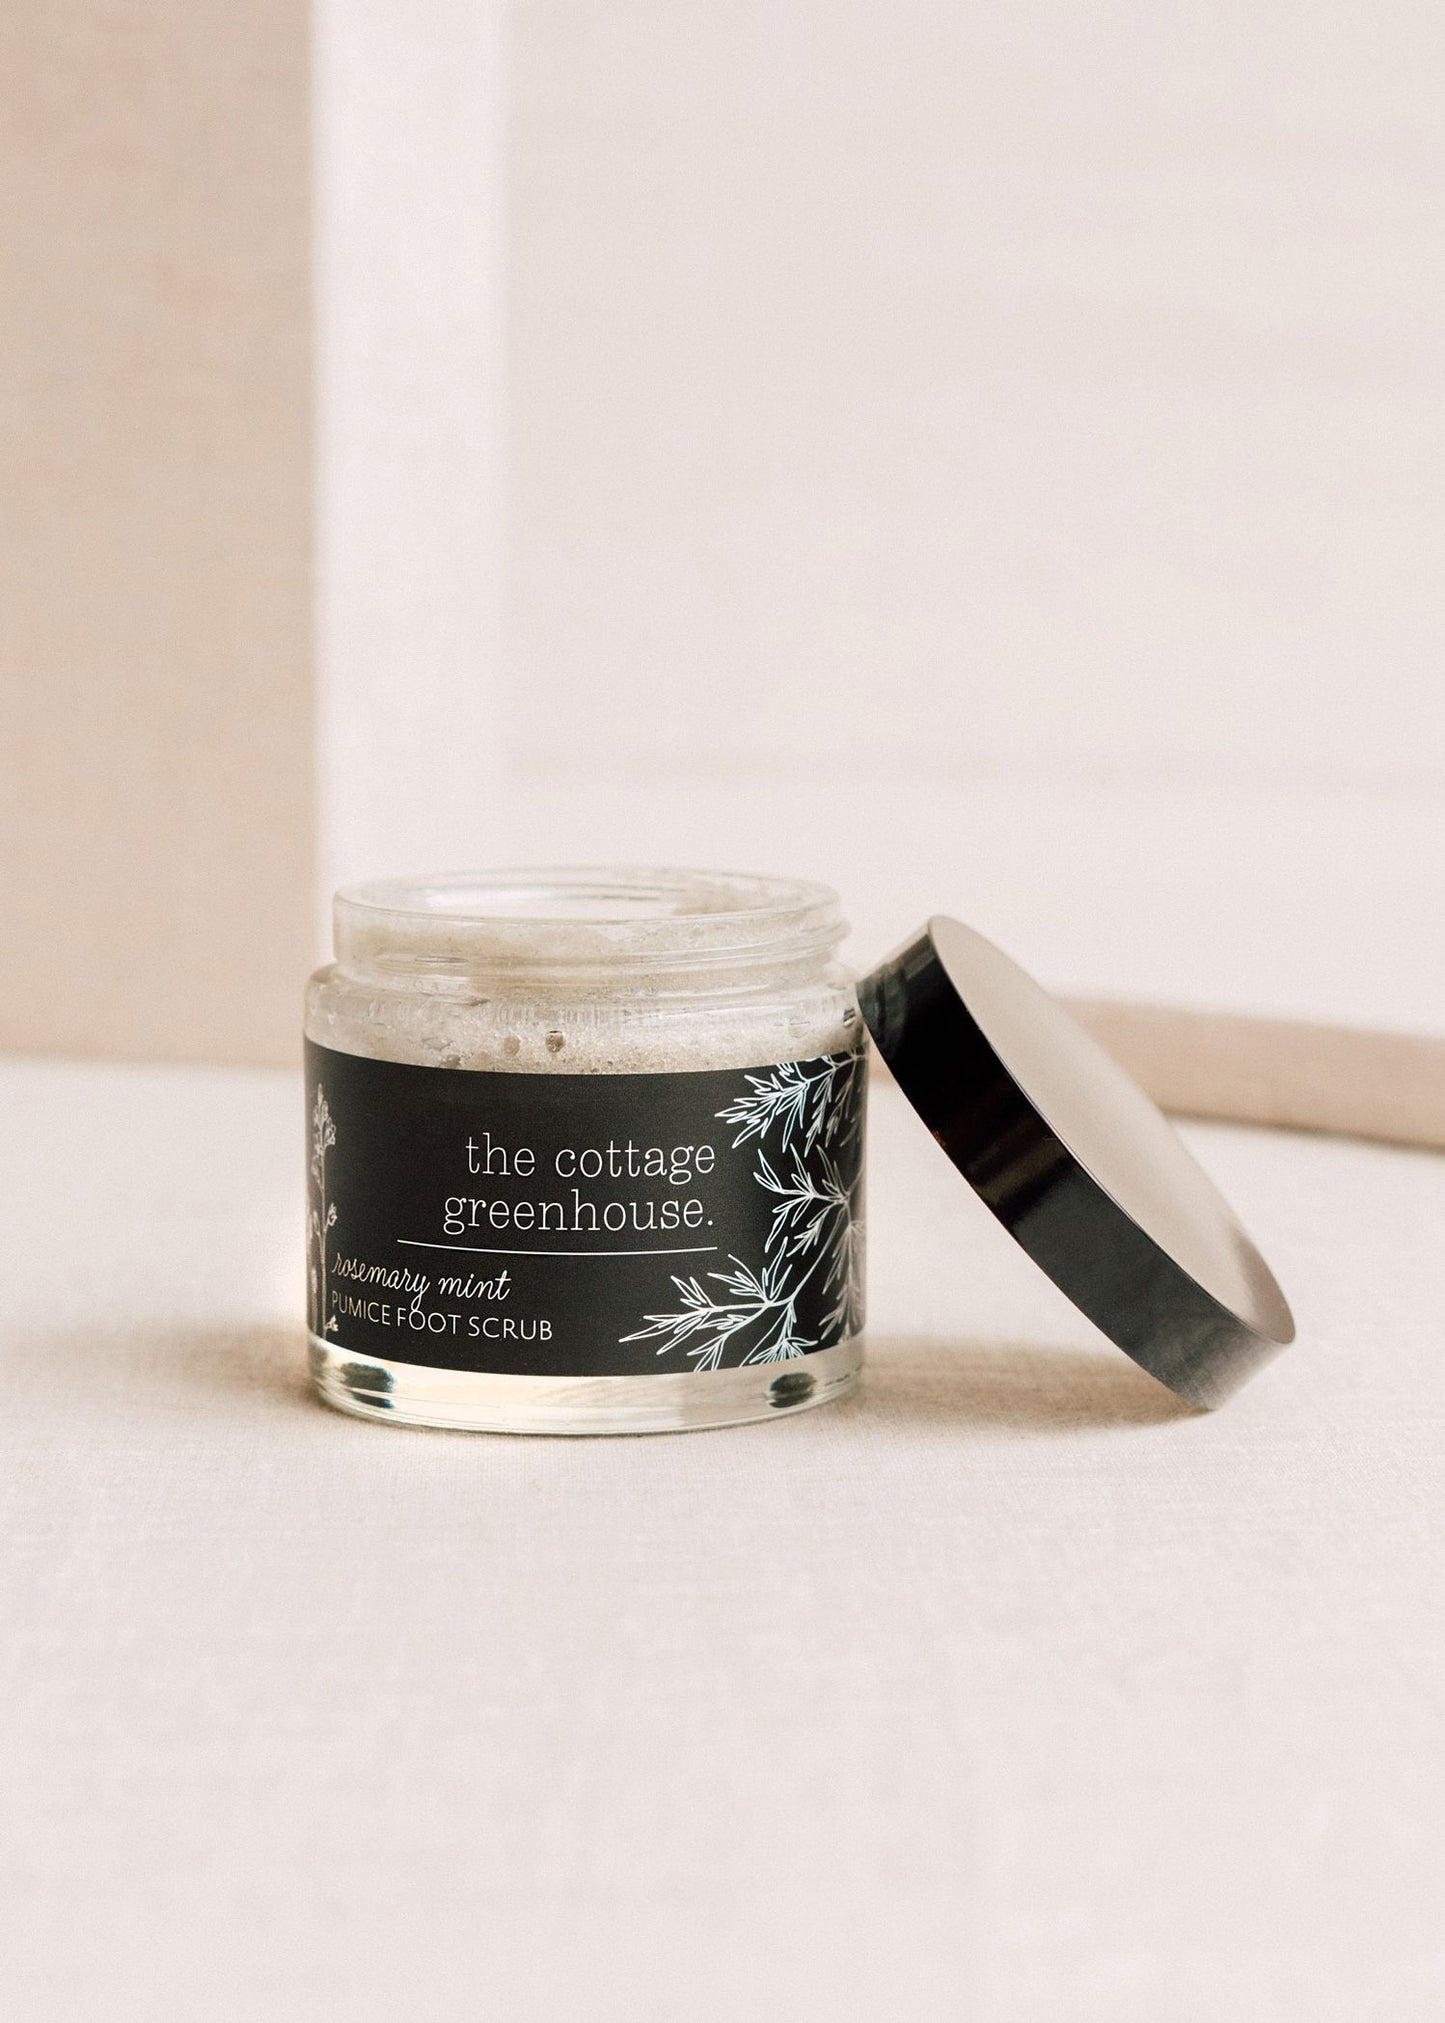 The Cottage Greenhouse Foot Scrub